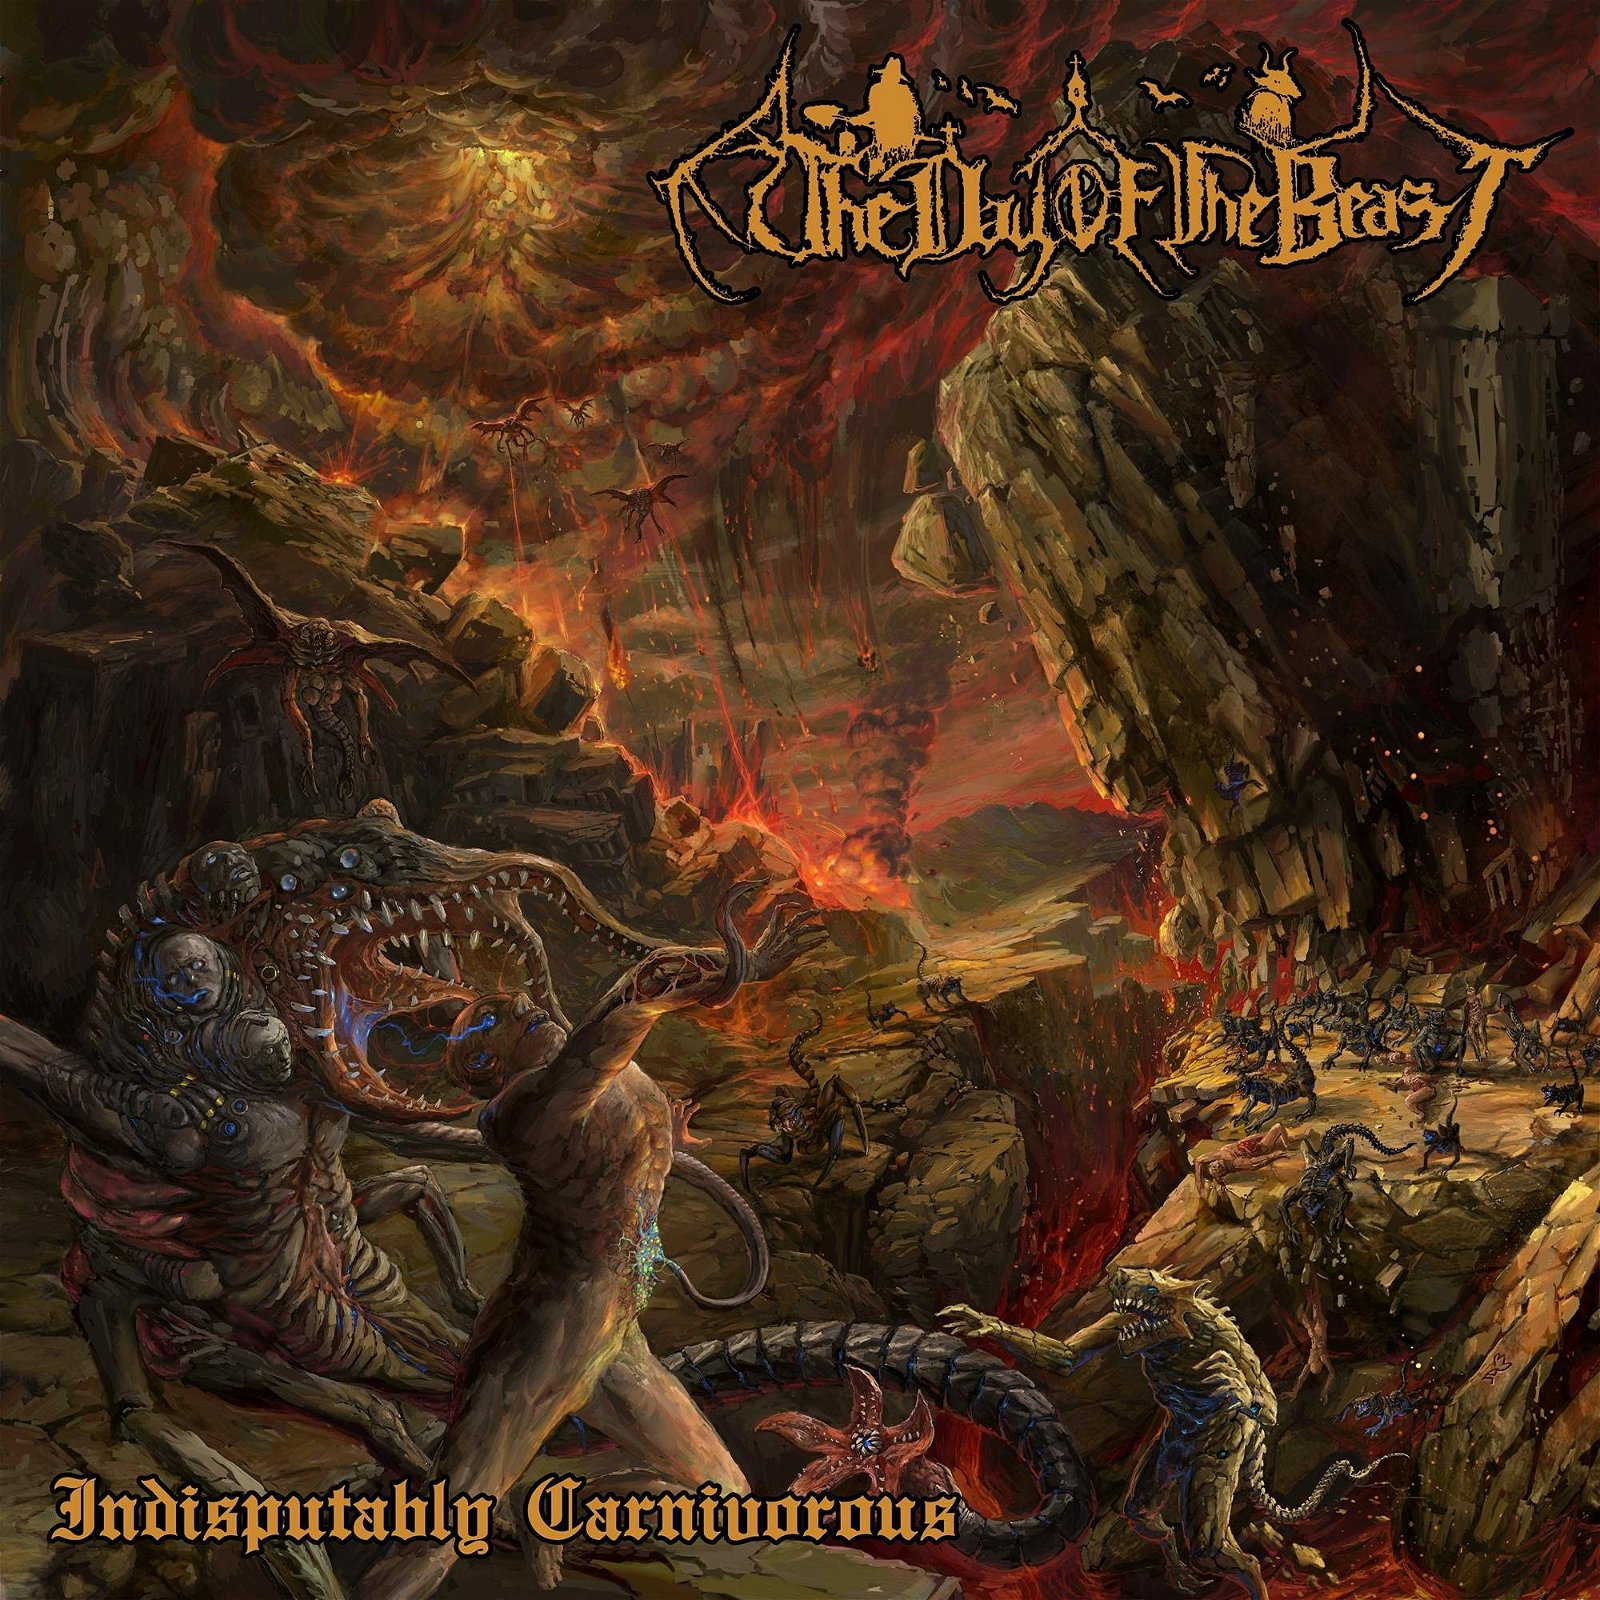 CD Shop - DAY OF THE BEAST INDISPUTABLY CARNIVOROUS